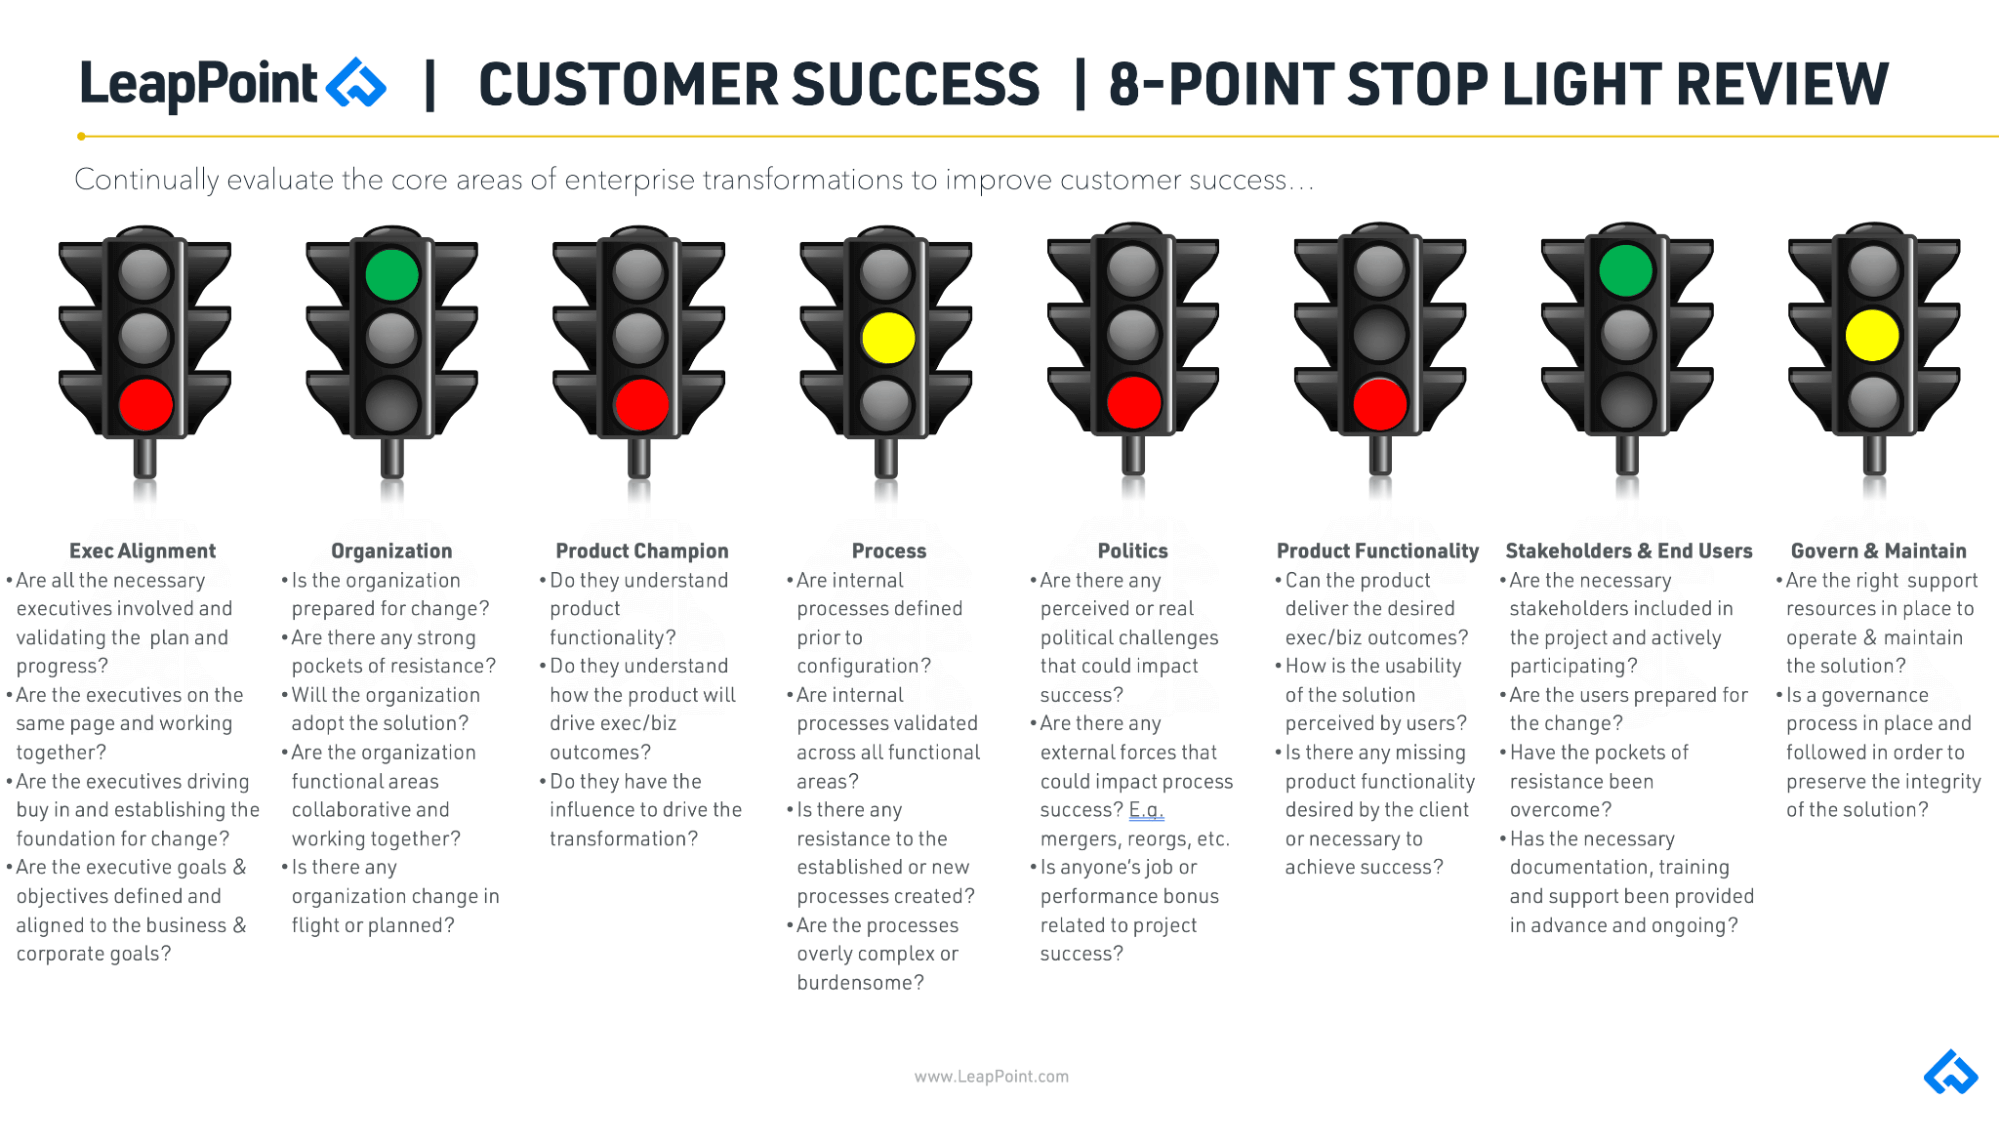 crossbeam-onboarding-activation-with-partners-leappoint-8-point-stop-light-chart-for-csms